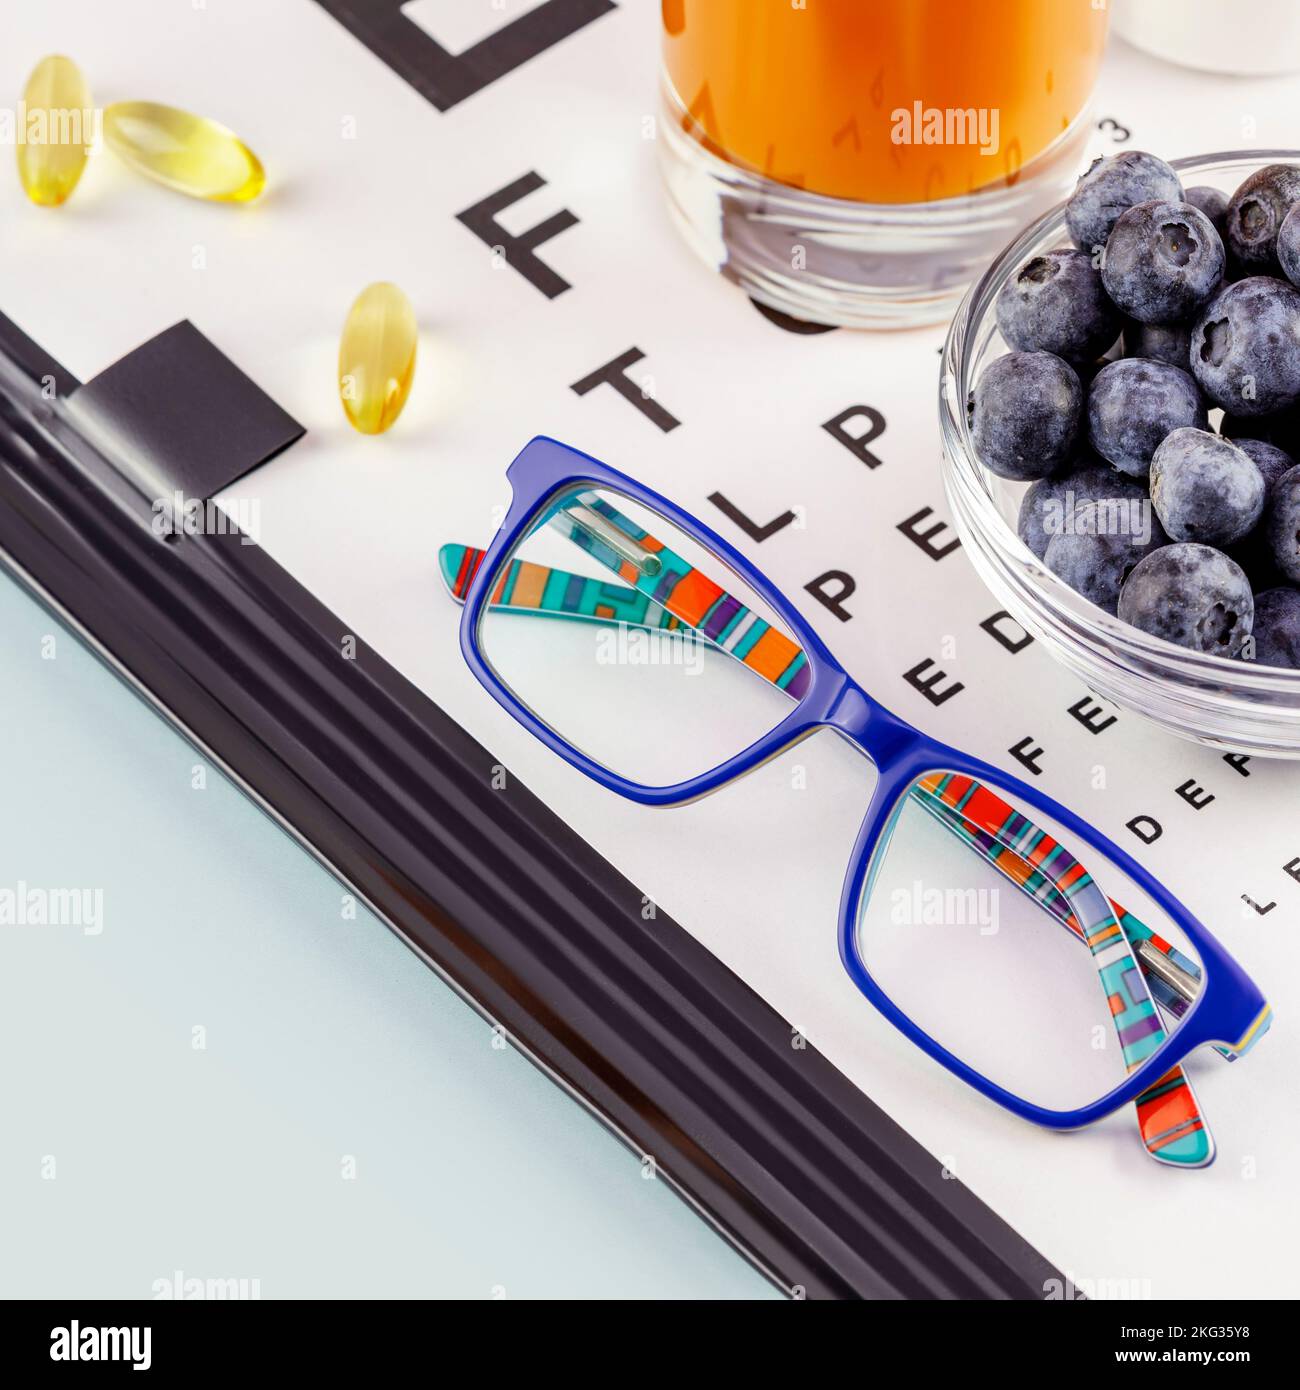 Kid eyeglasses, glass of carrot juice, bowl with blueberries and Snellen table for vision testing on blue background. Nutritions for good vision. Vita Stock Photo